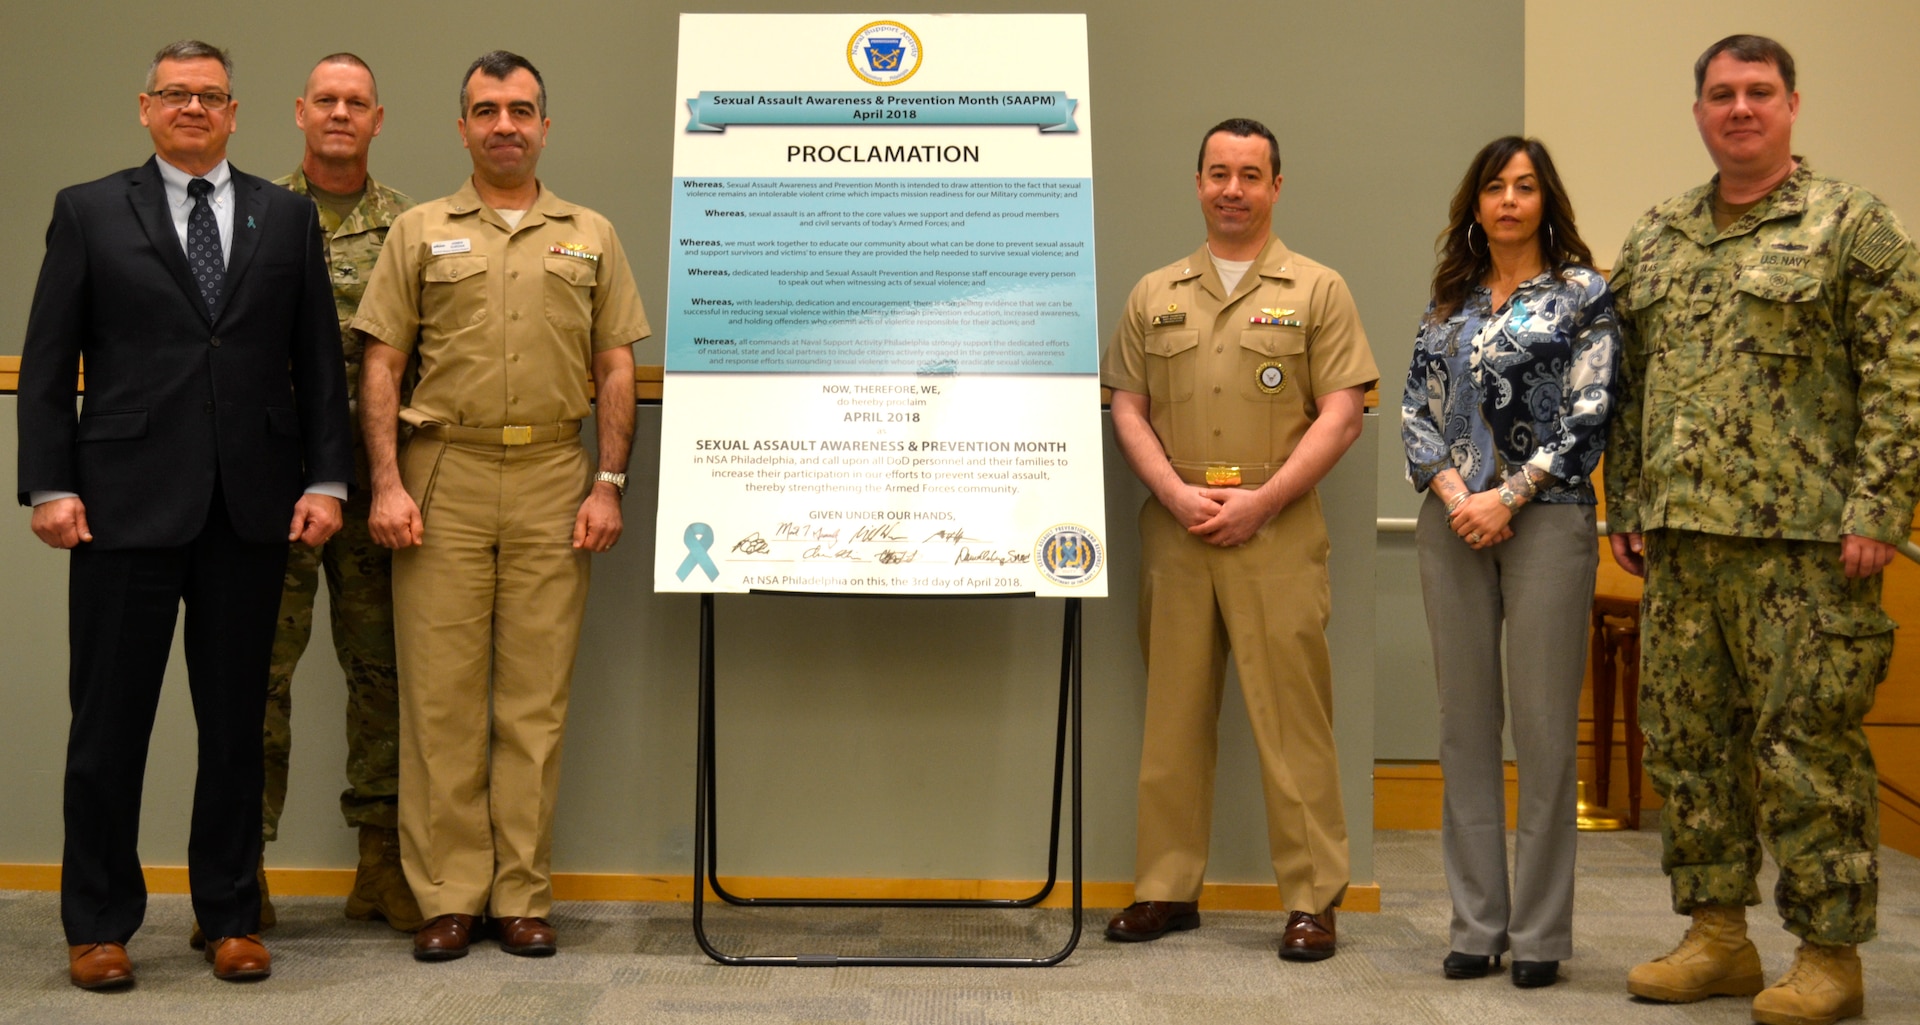 NSA Philadelphia tenant command representatives and Sexual Assault Prevention and Response program leads stand together after signing the 2018 Sexual Assault Awareness and Prevention Month proclamation at DLA Troop Support in Philadelphia April 3.